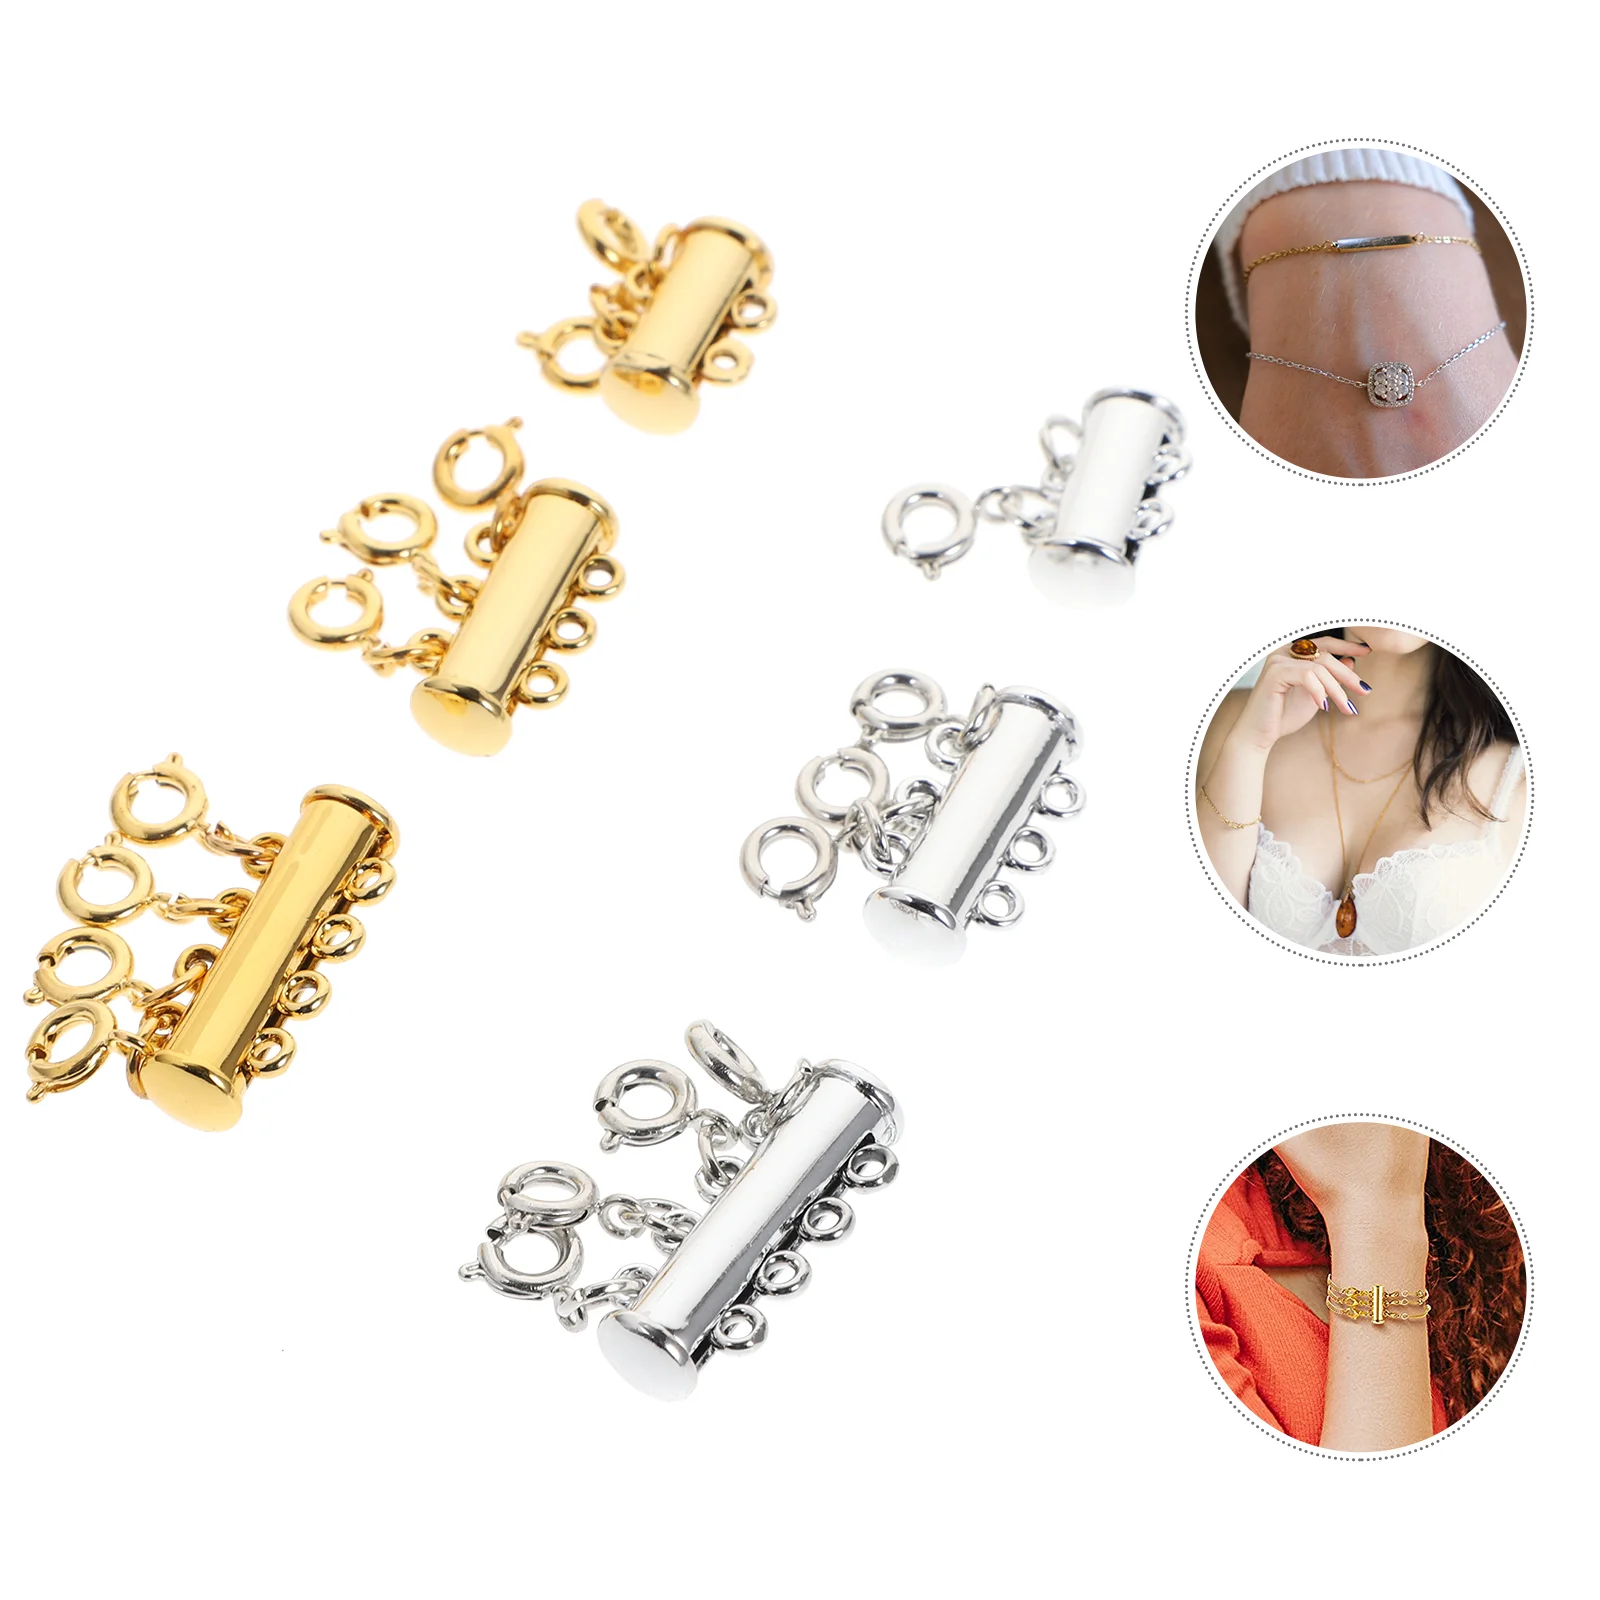 

Clasp Necklace Clasps Jewelry Layering Bracelet Layered Tube Spacer Strand Slide Separator Buckle Spring Chain Connectors